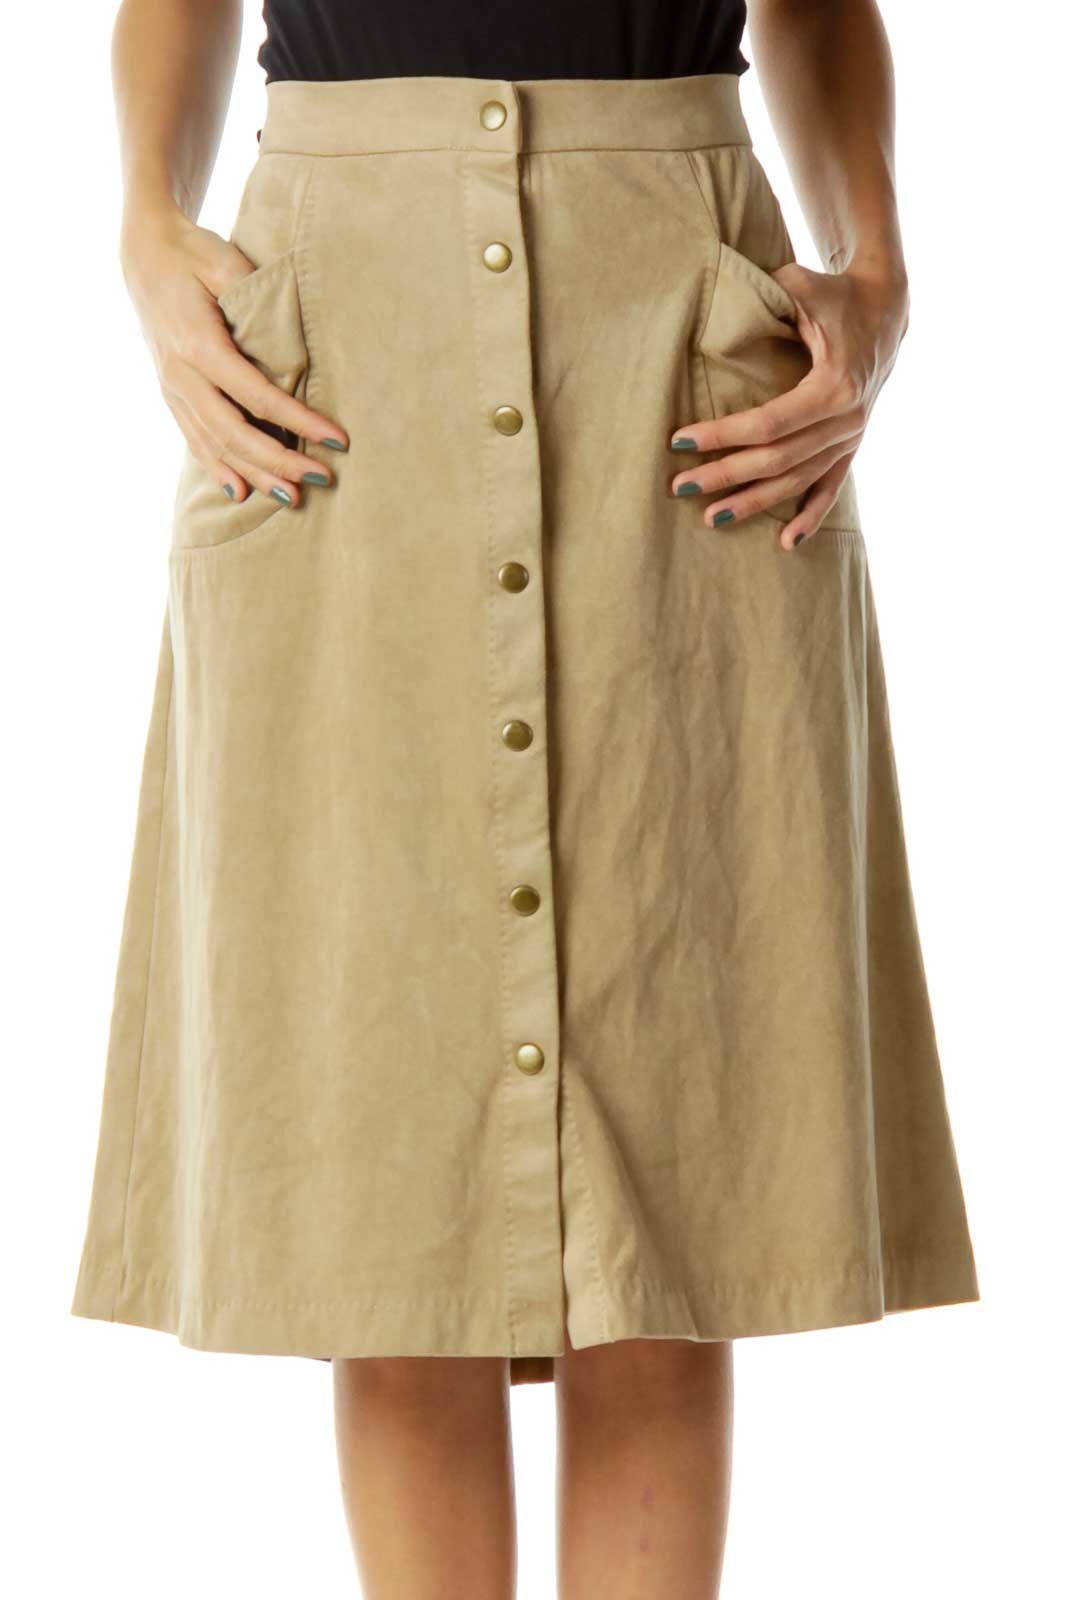 Tan Buttoned Skirt w/ Pockets Front